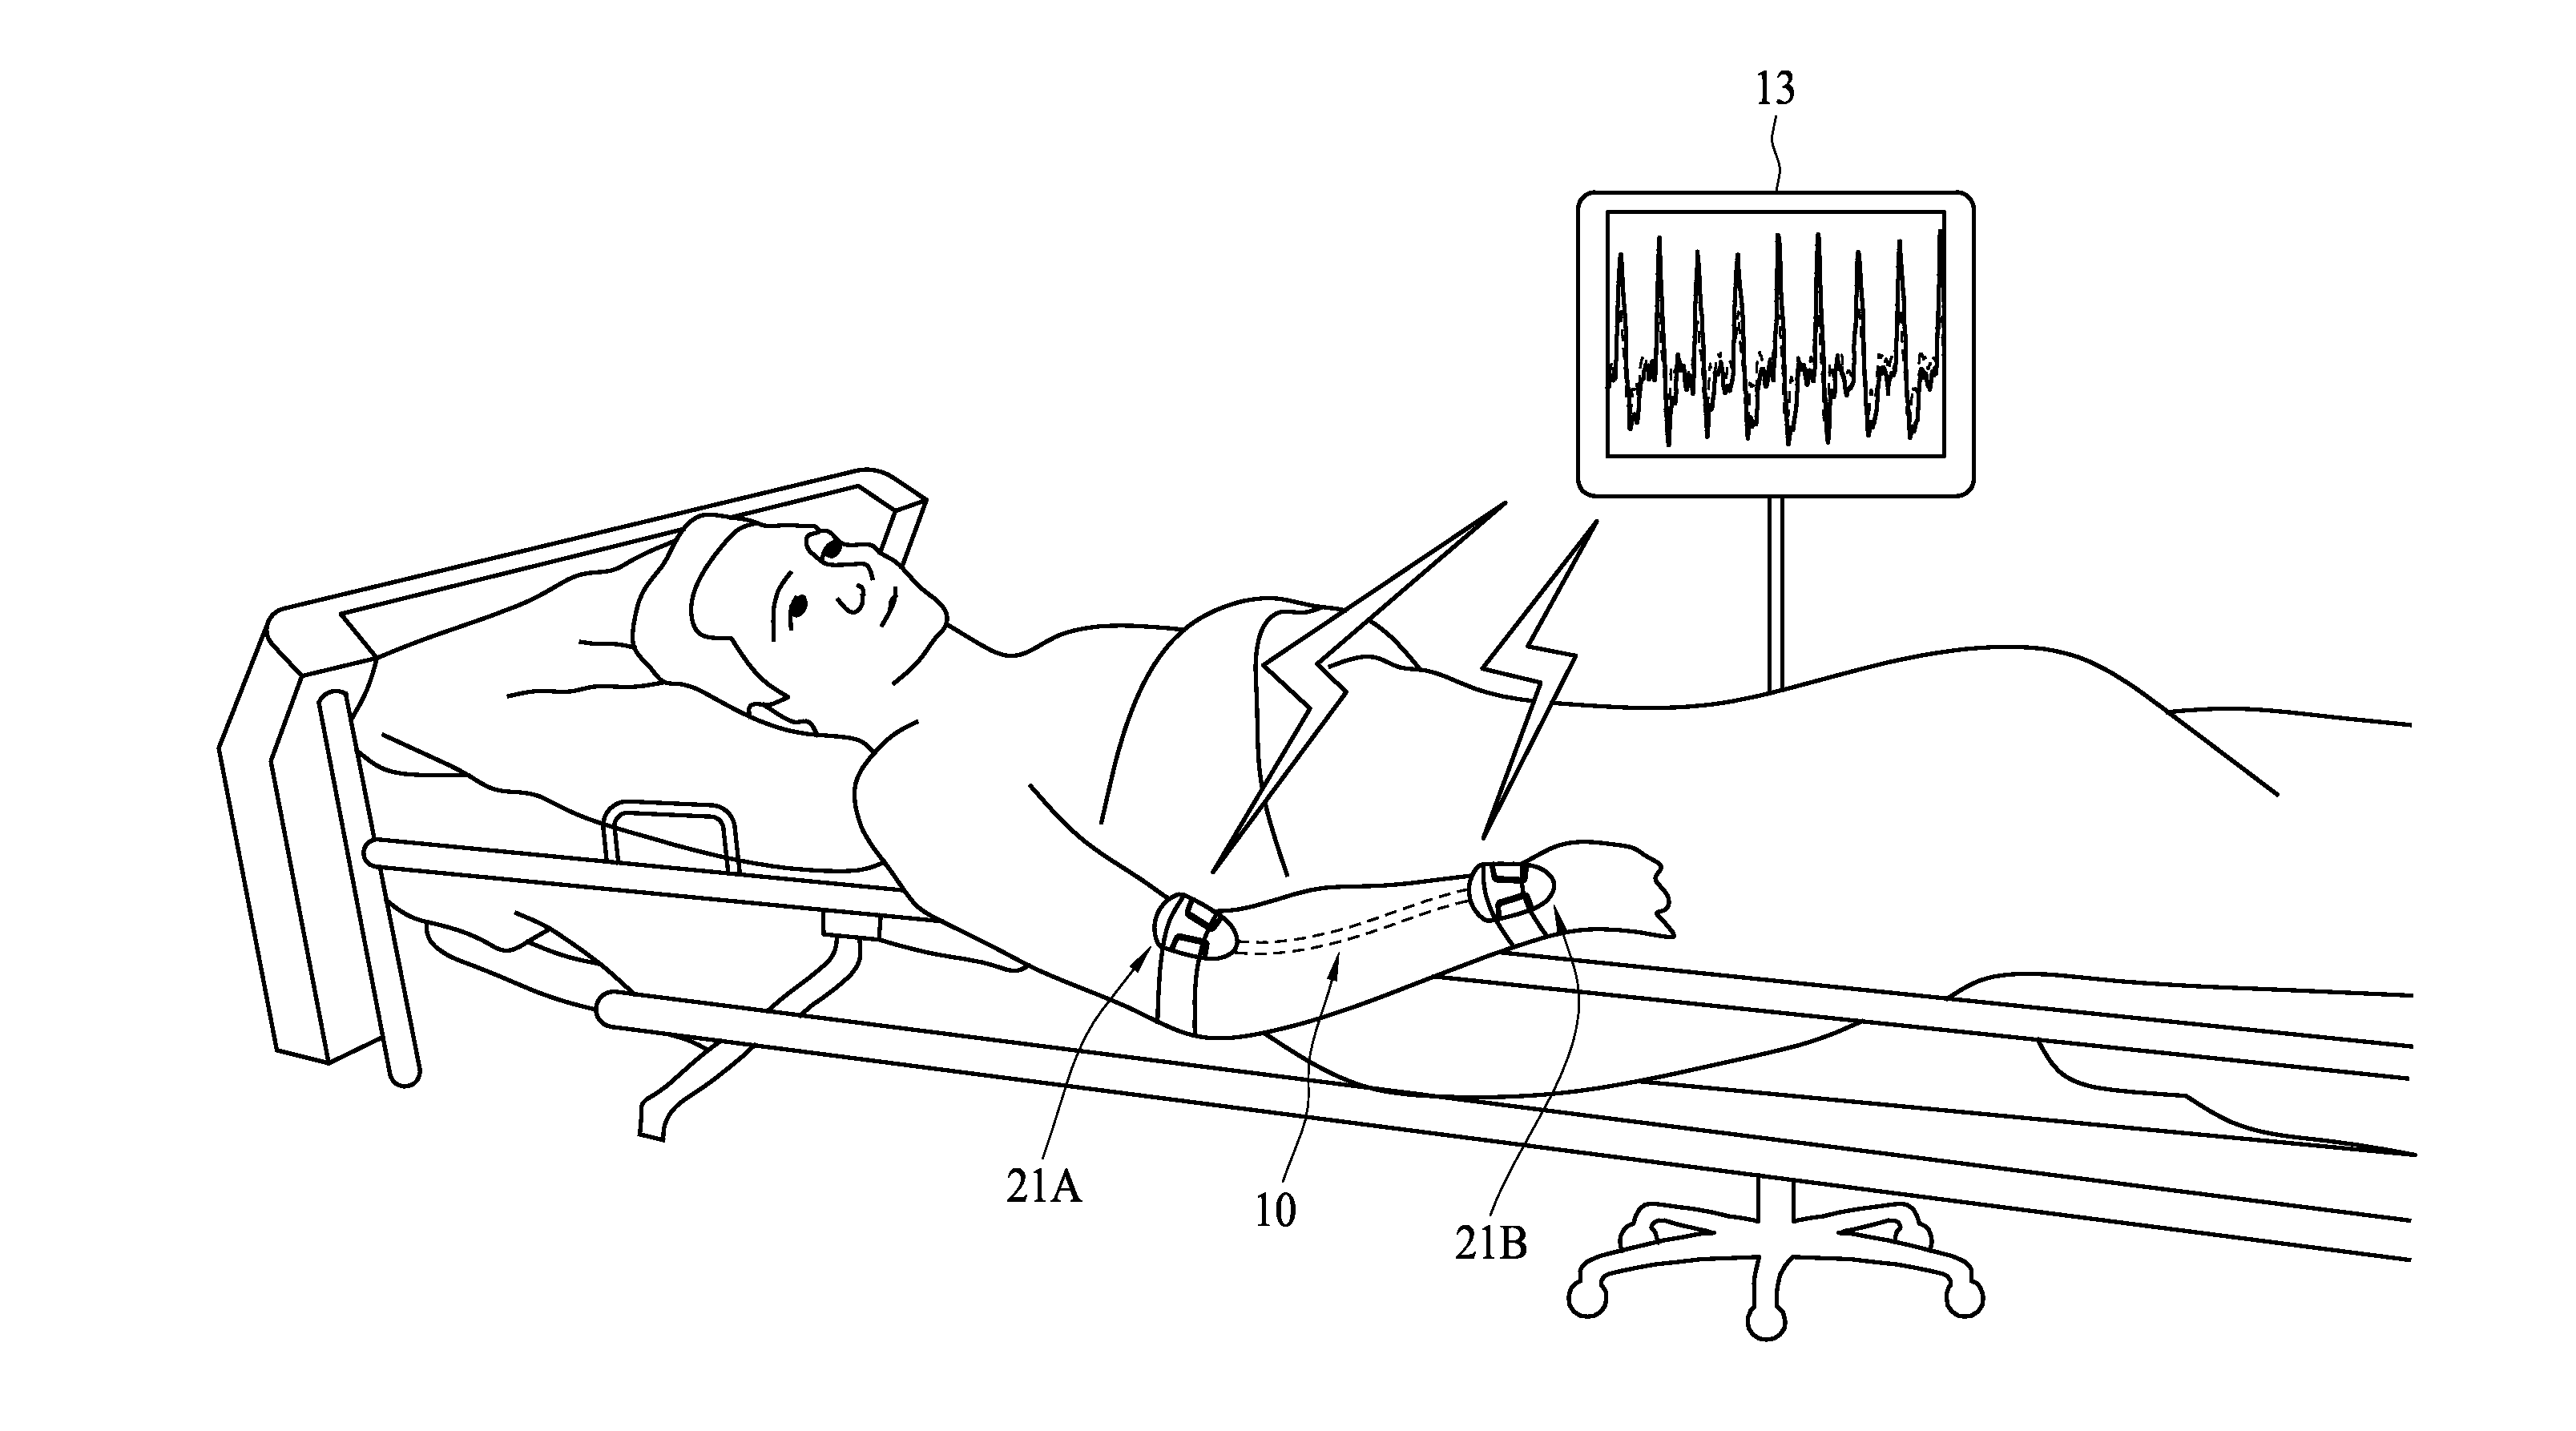 Non-invasive continuous blood pressure monitoring system and method